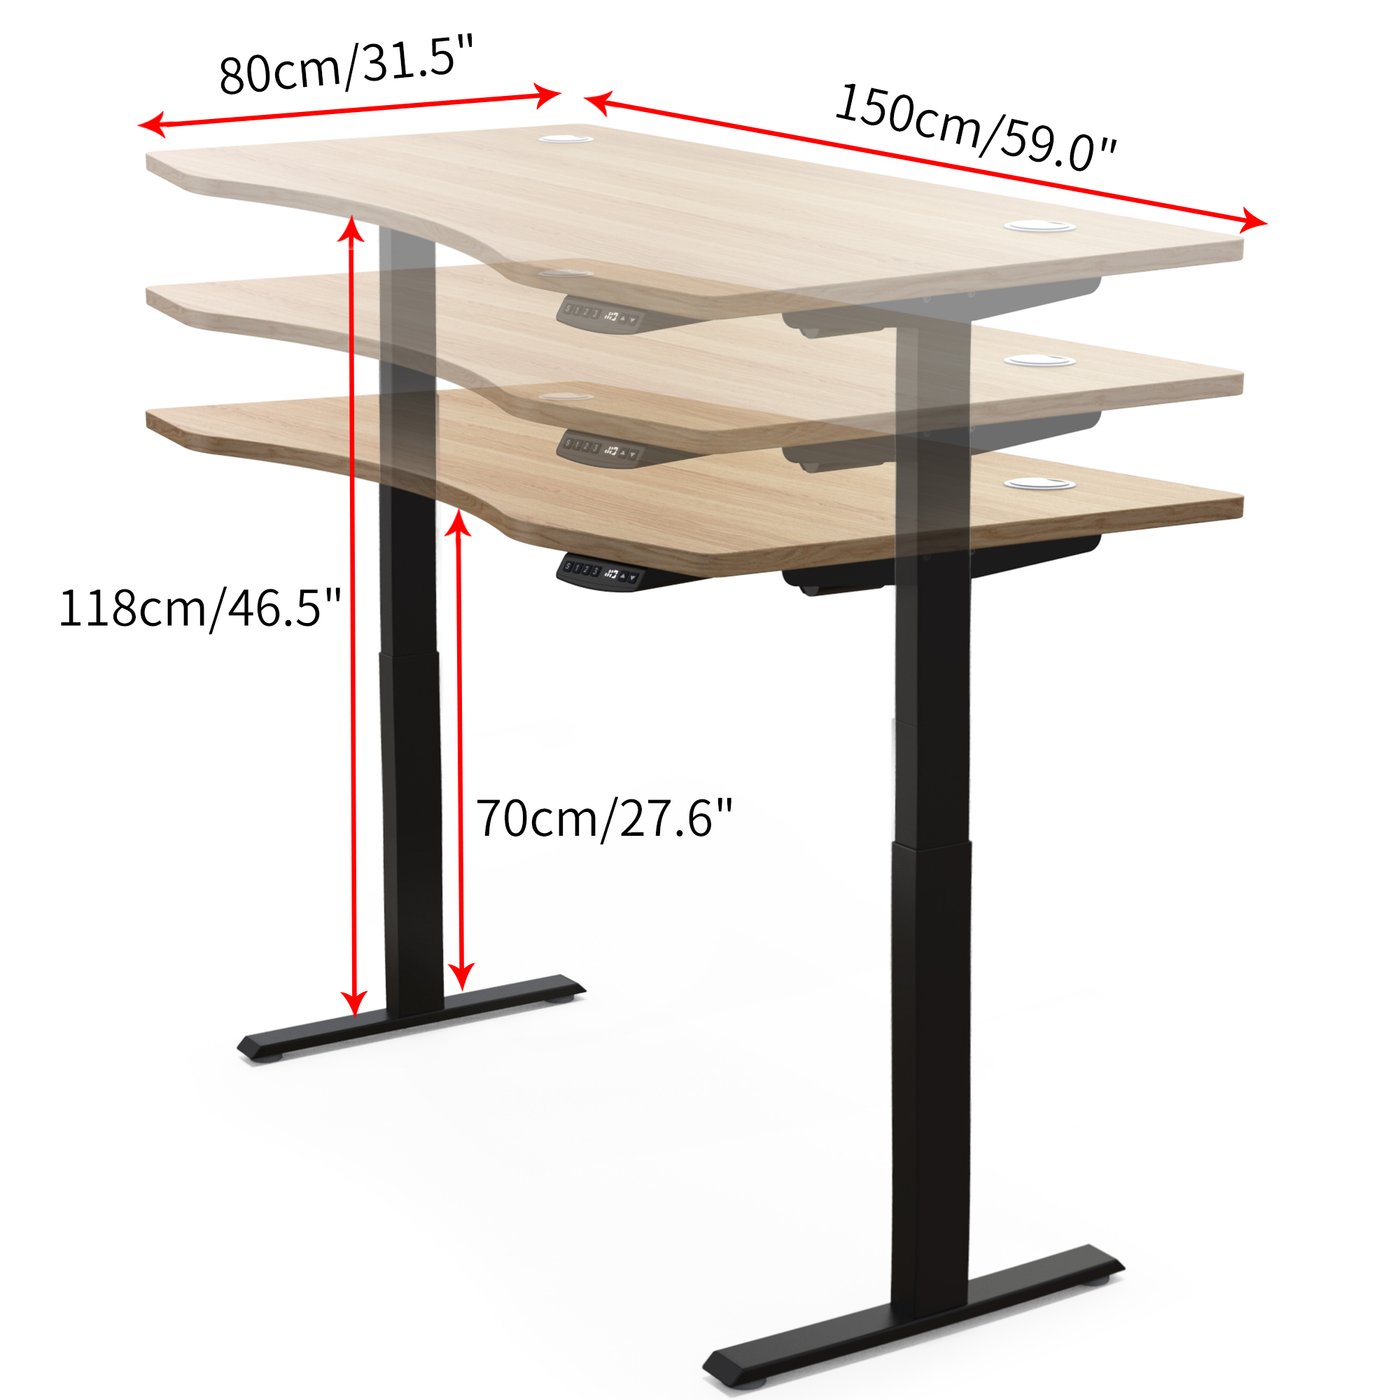 Bella2Bello's Electric Height Adjustable Standing Desk with ergonomic contoured Tabletop (59"x 31.5") and dual motor lift system for Home Office Workstation